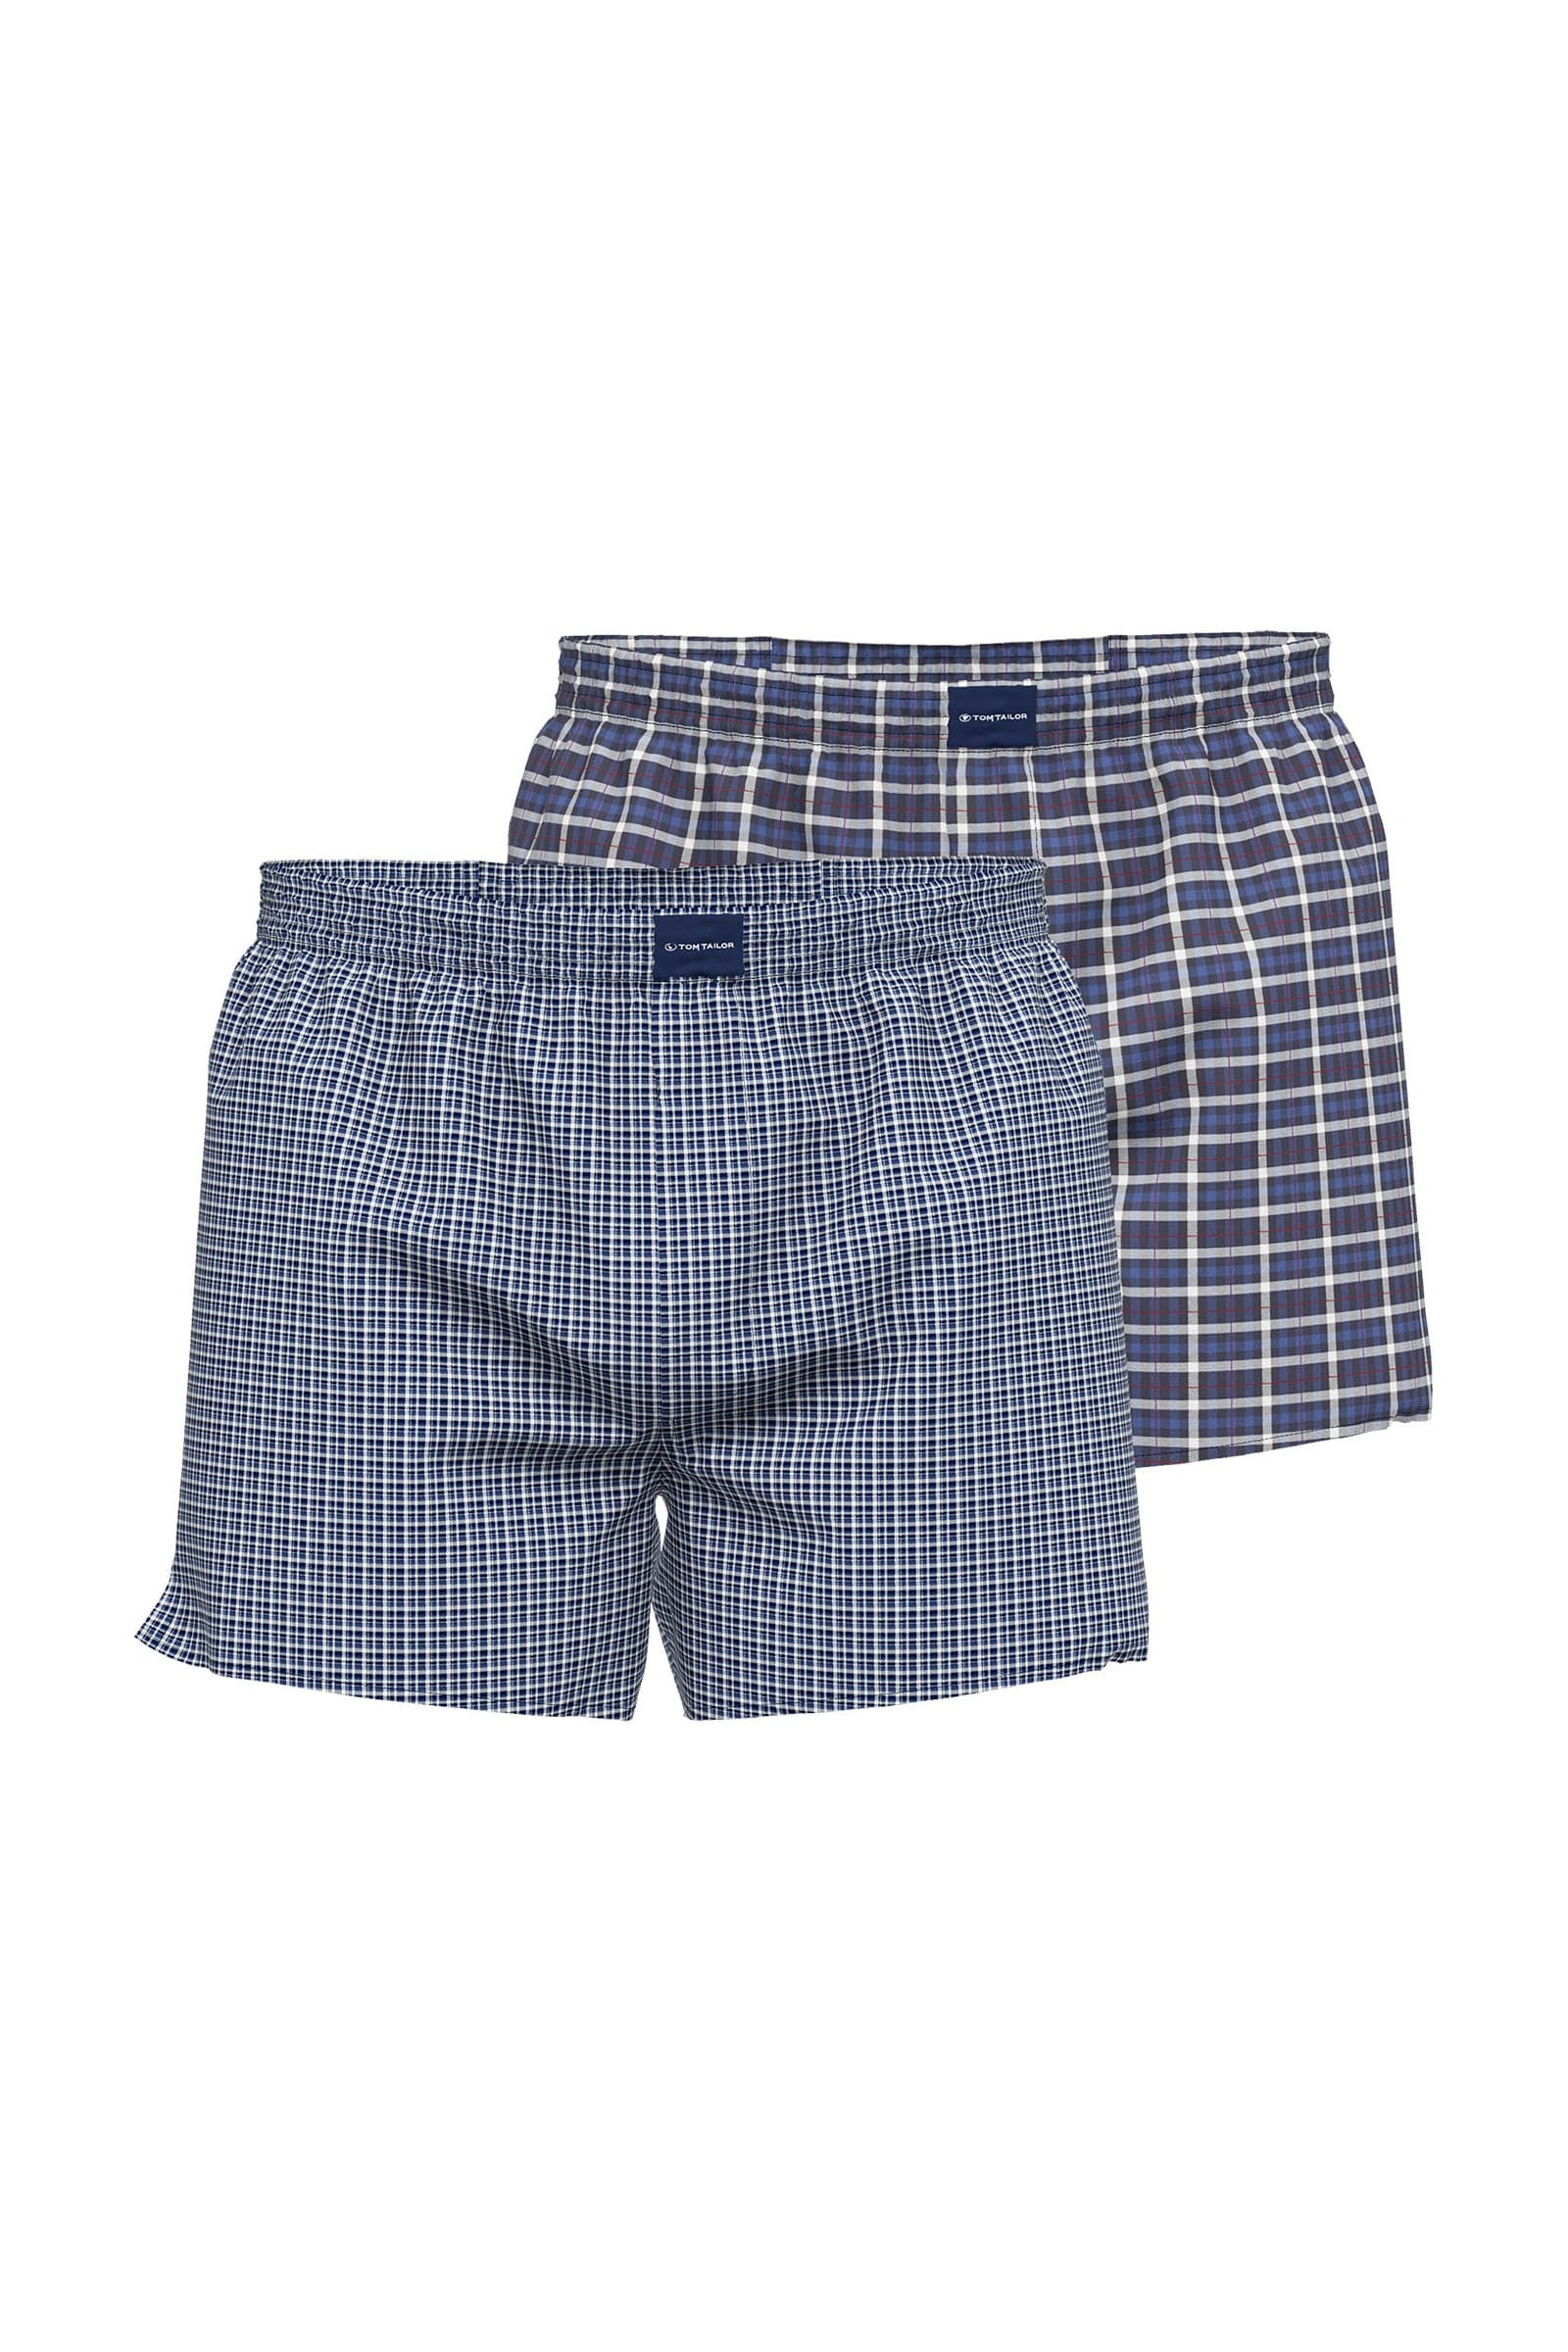 Tom Tailor Woven Boxer Shorts - 2 Pack - Dark Blue Check – Potters of Buxton